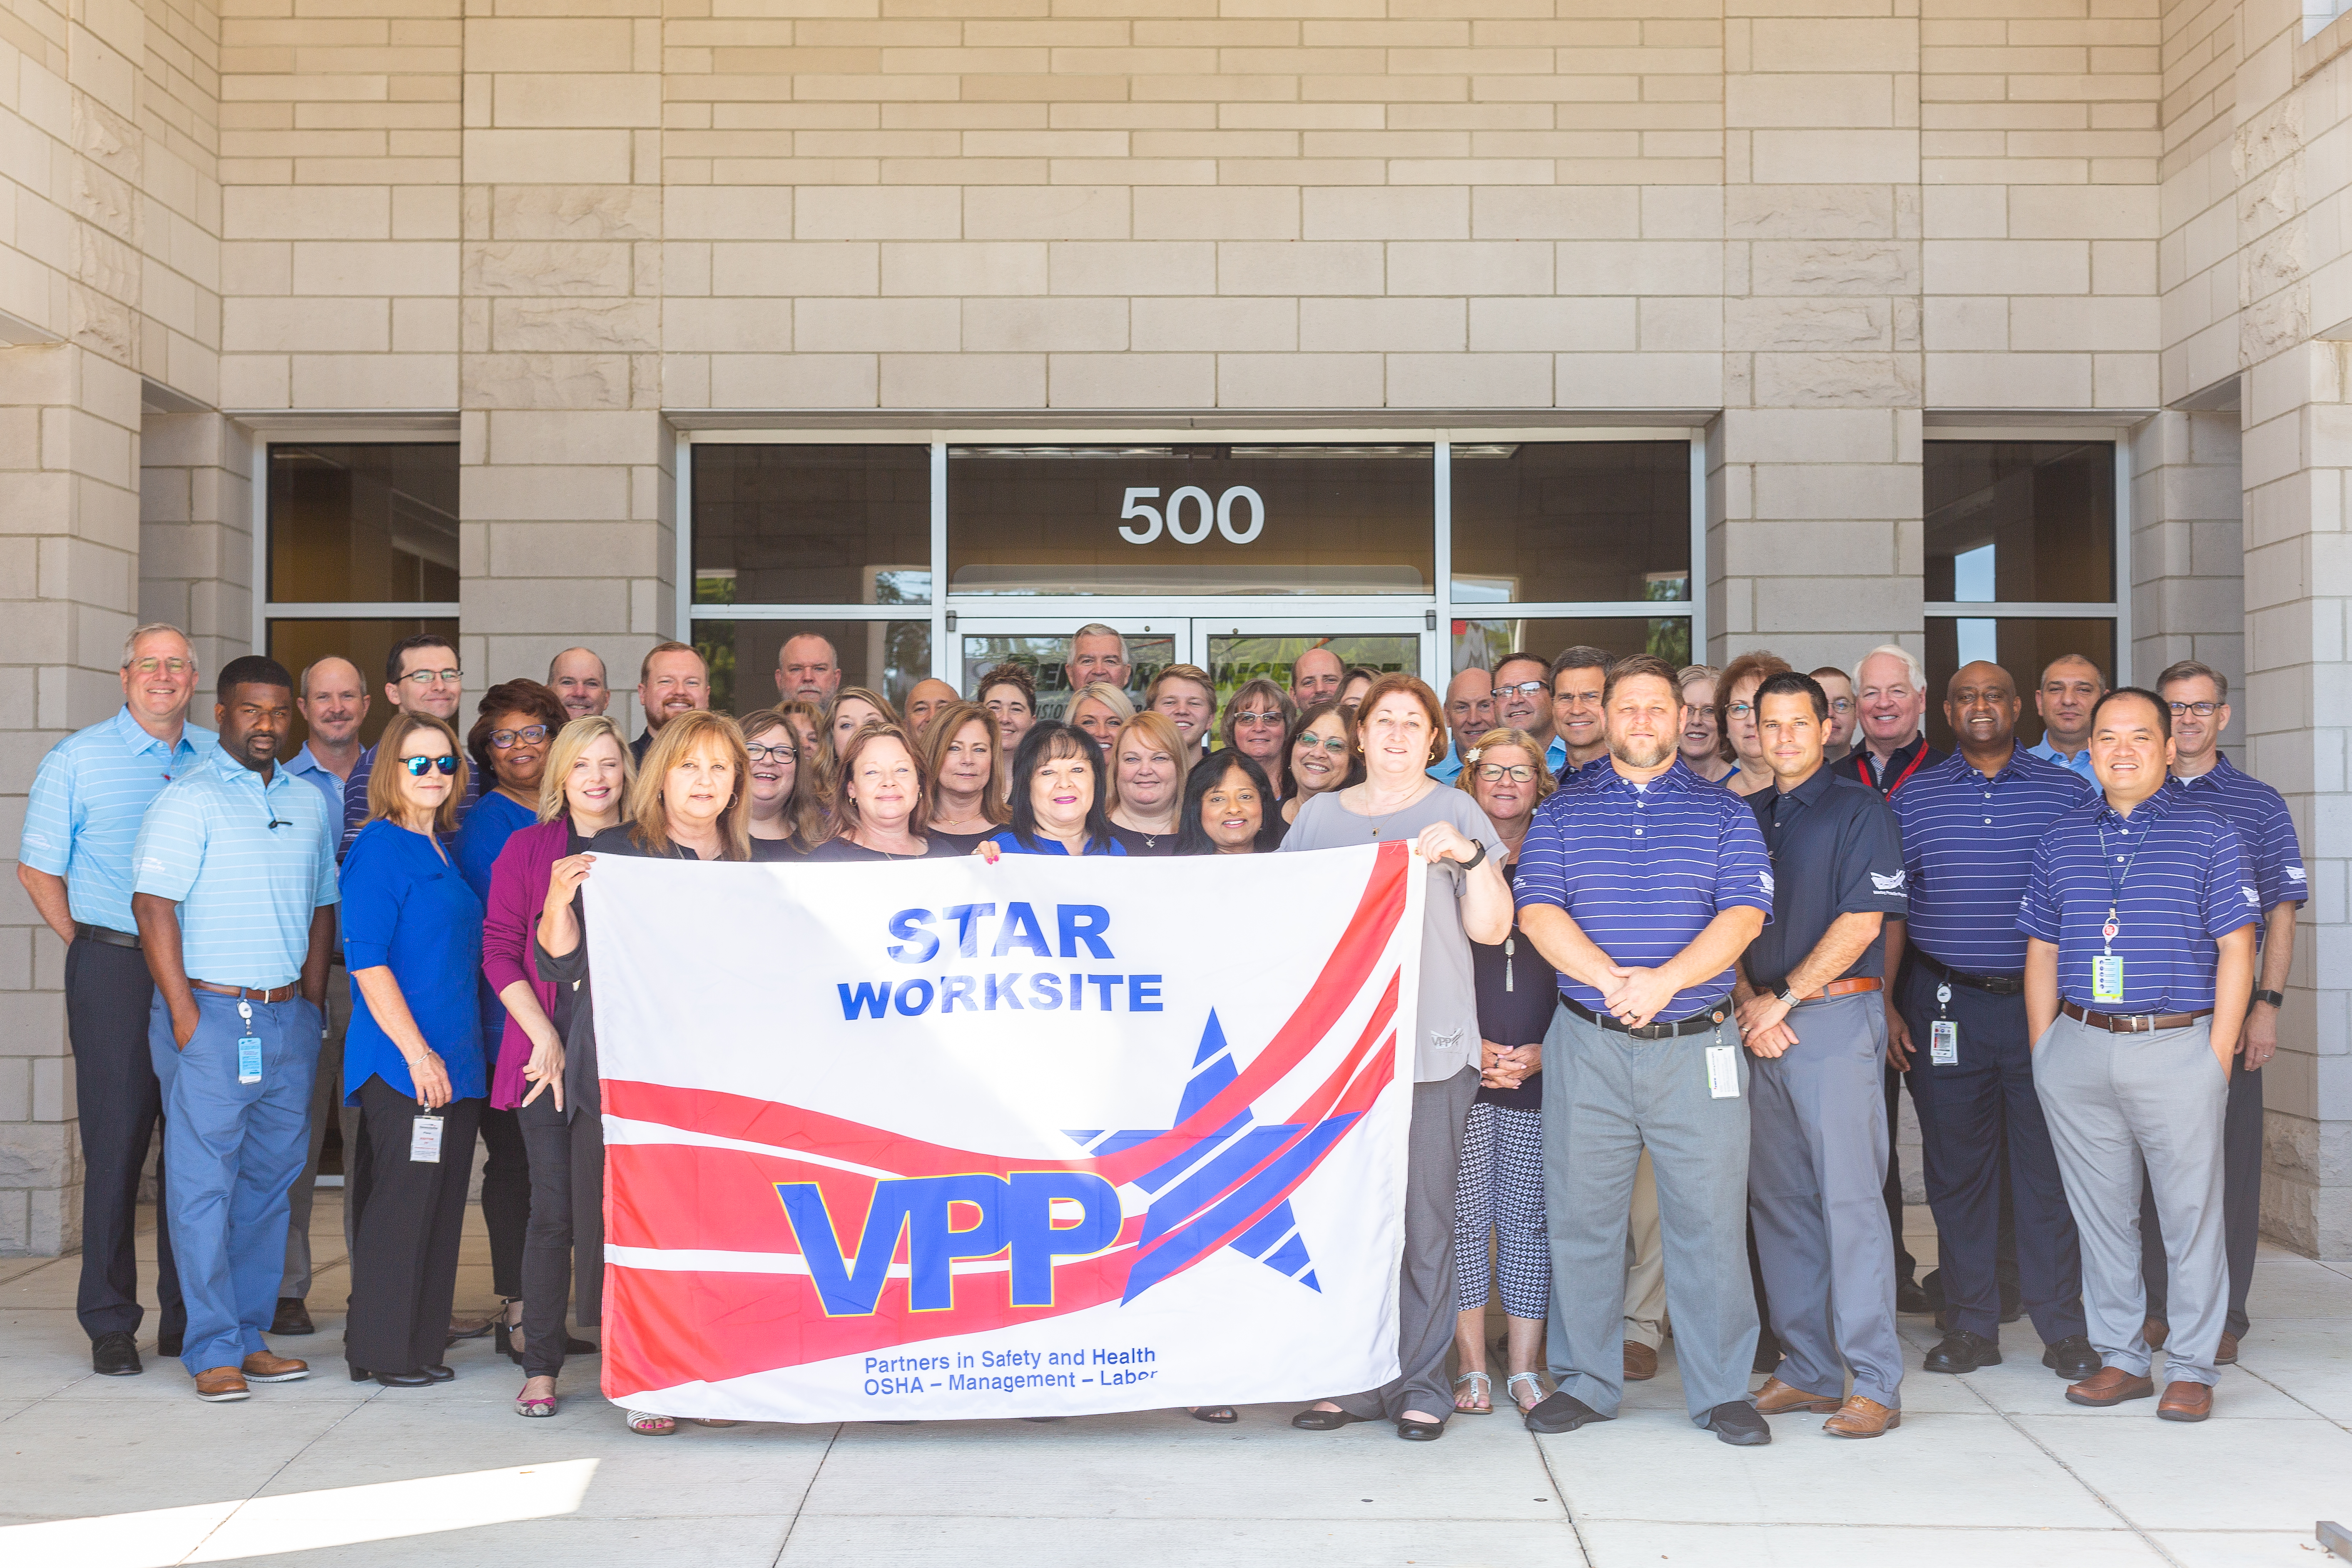 The Plano office of Chevron Phillips Chemical's Performance Pipe division has earned Star Site designation by the Voluntary Protection Program (VPP) of the Occupational Safety and Health Administration (OSHA).